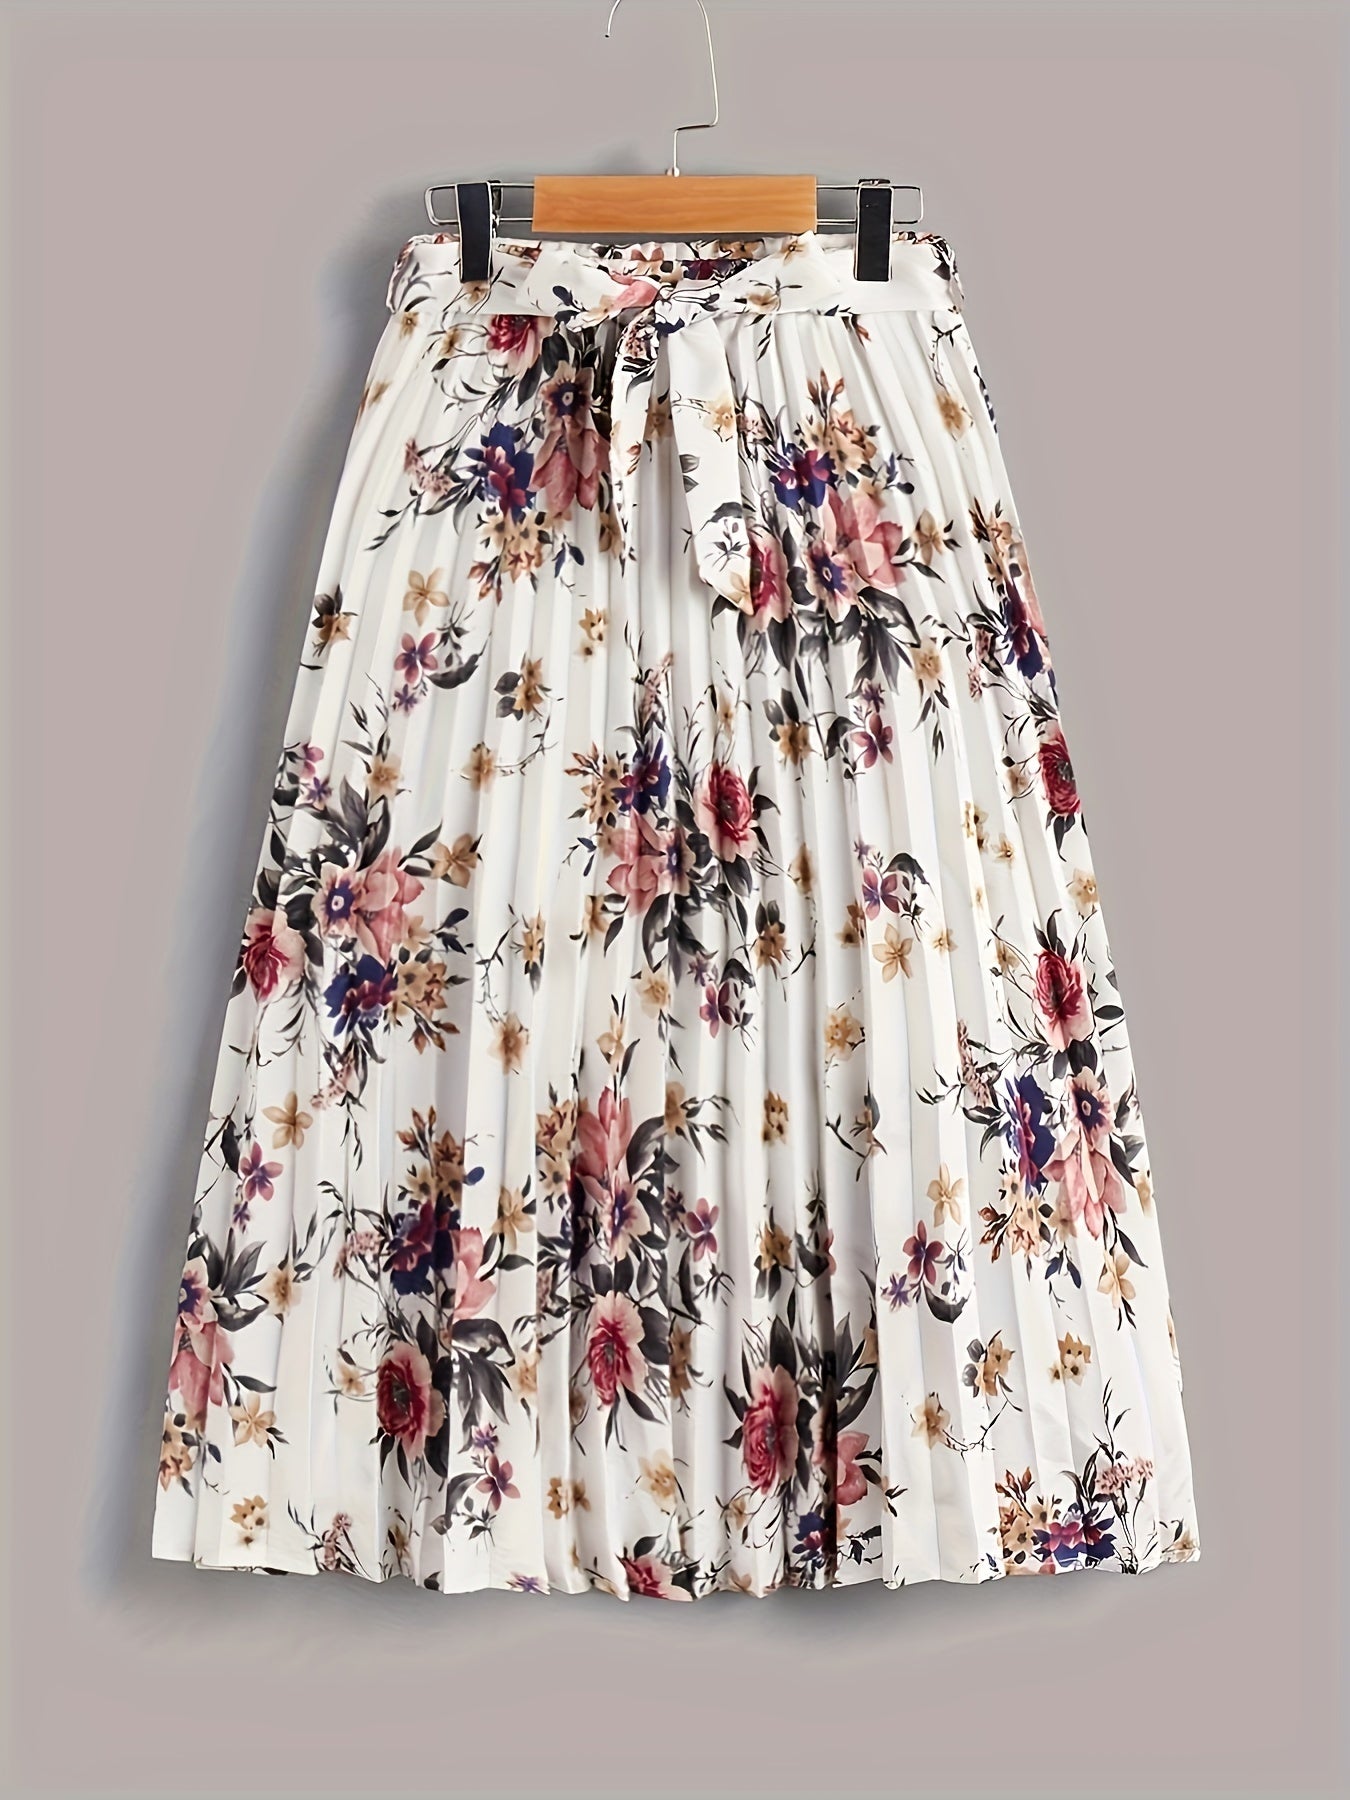 Vintage Floral Print Skirts, Elegant Pleated Tie Waist Daily Skirts, Women's Clothing